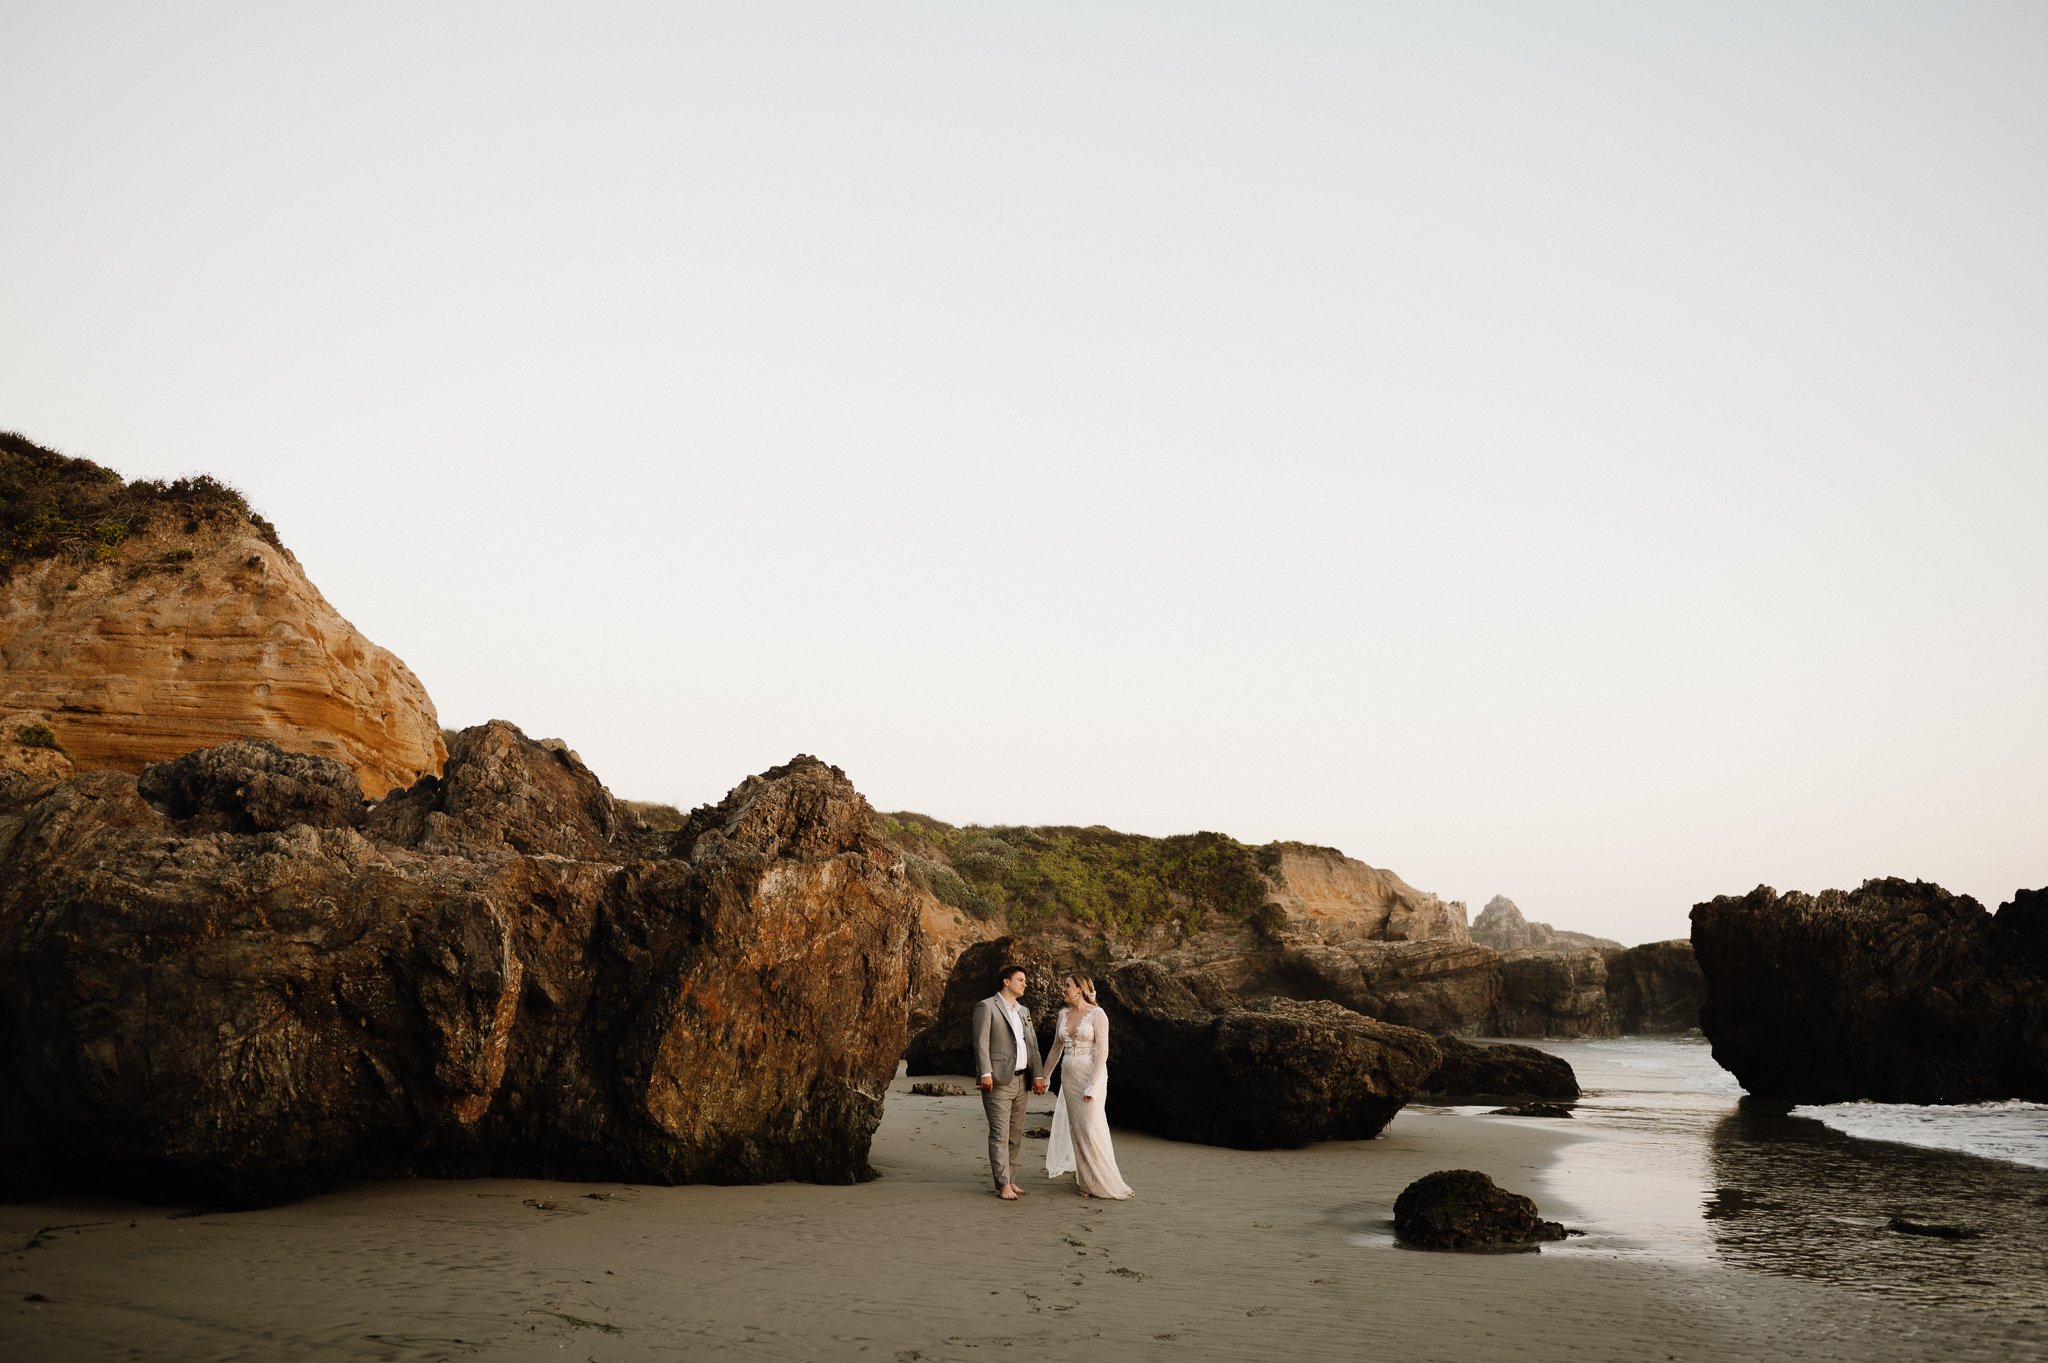 Big Sur bride and groom on beach walking in sand with cliffs and hills in background looking and each other smiling